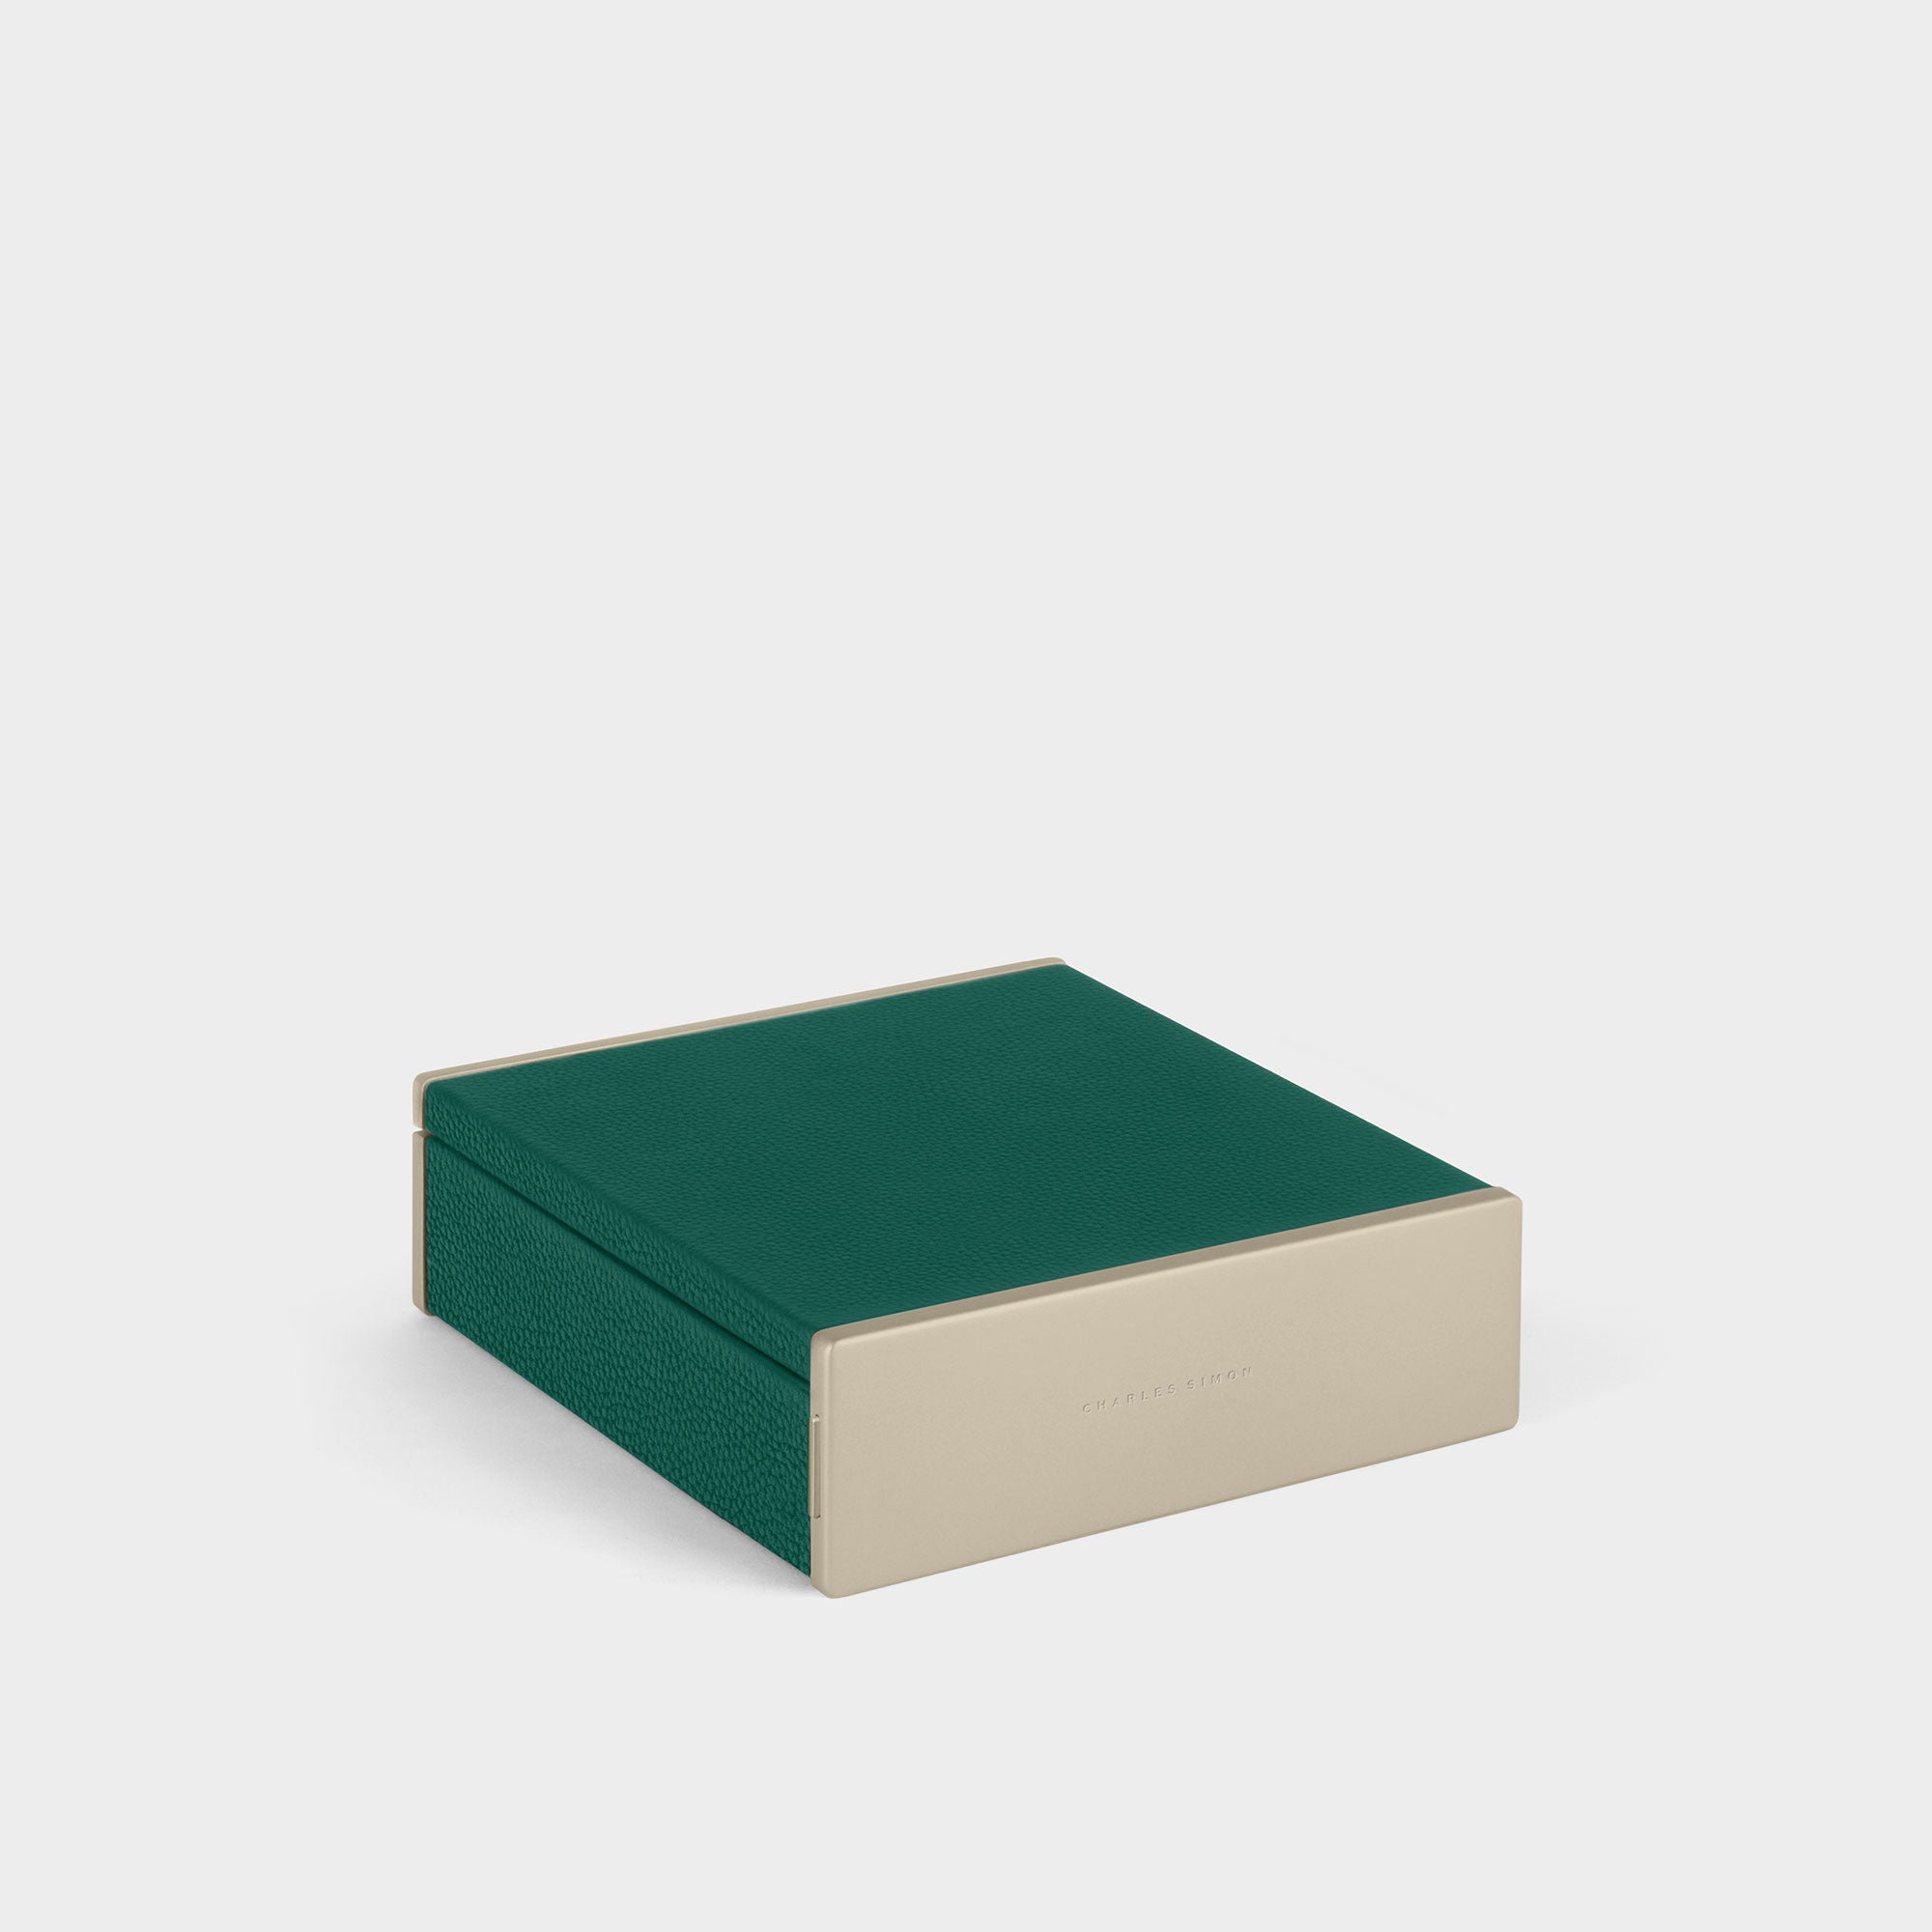 Product photo of closed gold watch box with emerald leather. Handmade in Canada.